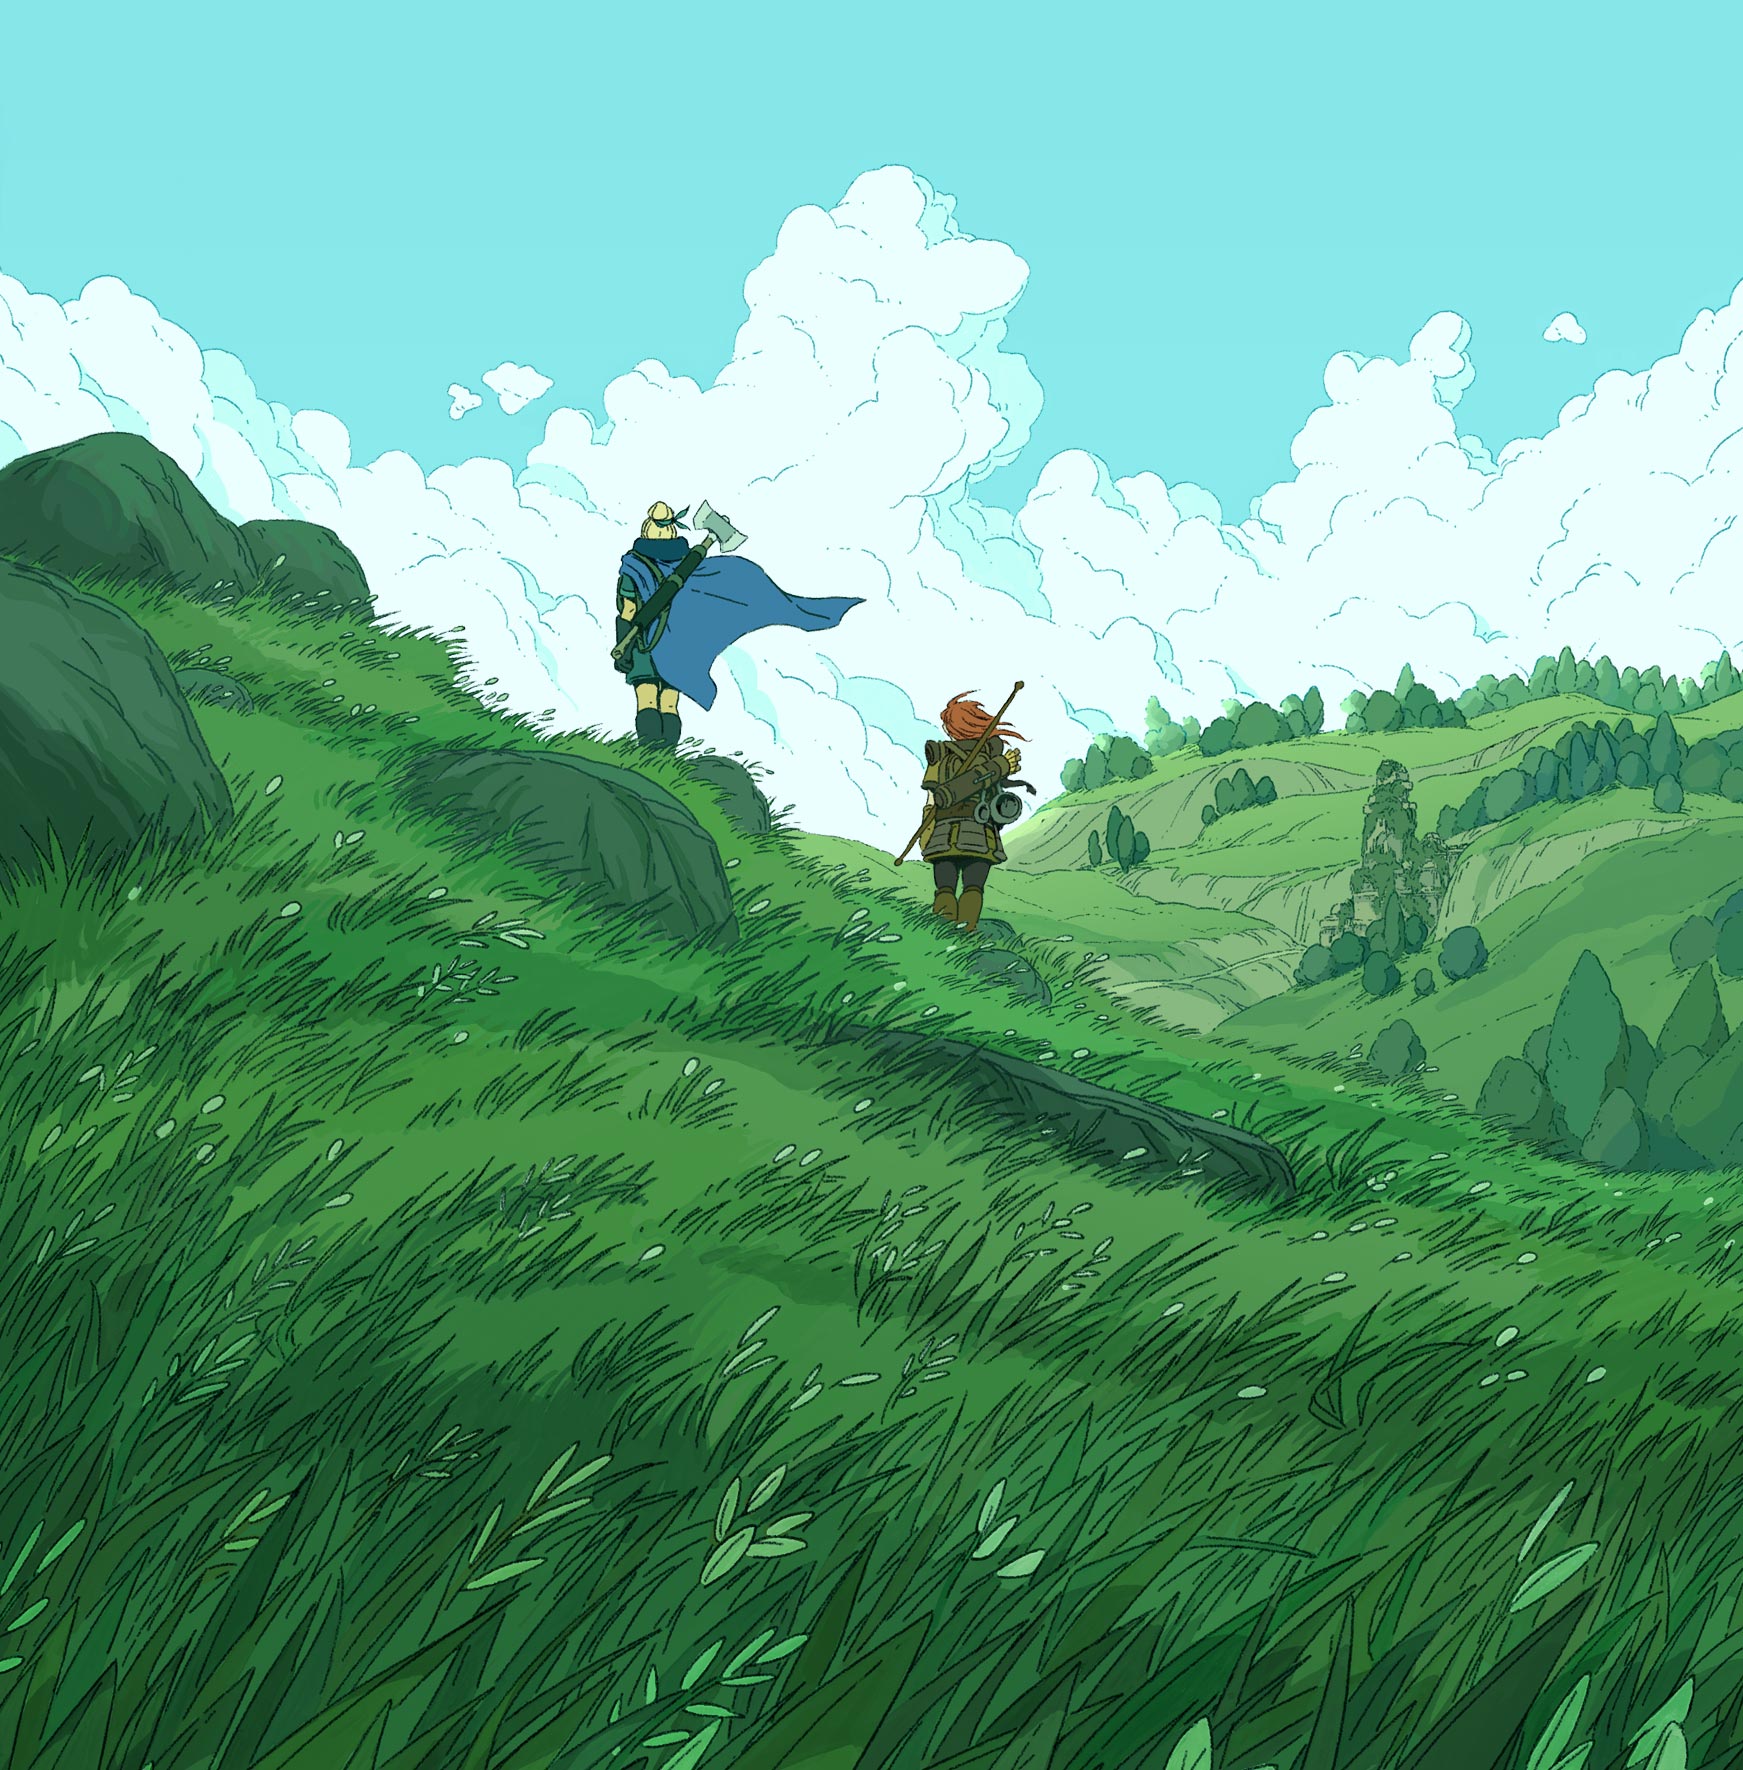 Two warriors stand in grassy hills, looking over the horizon.